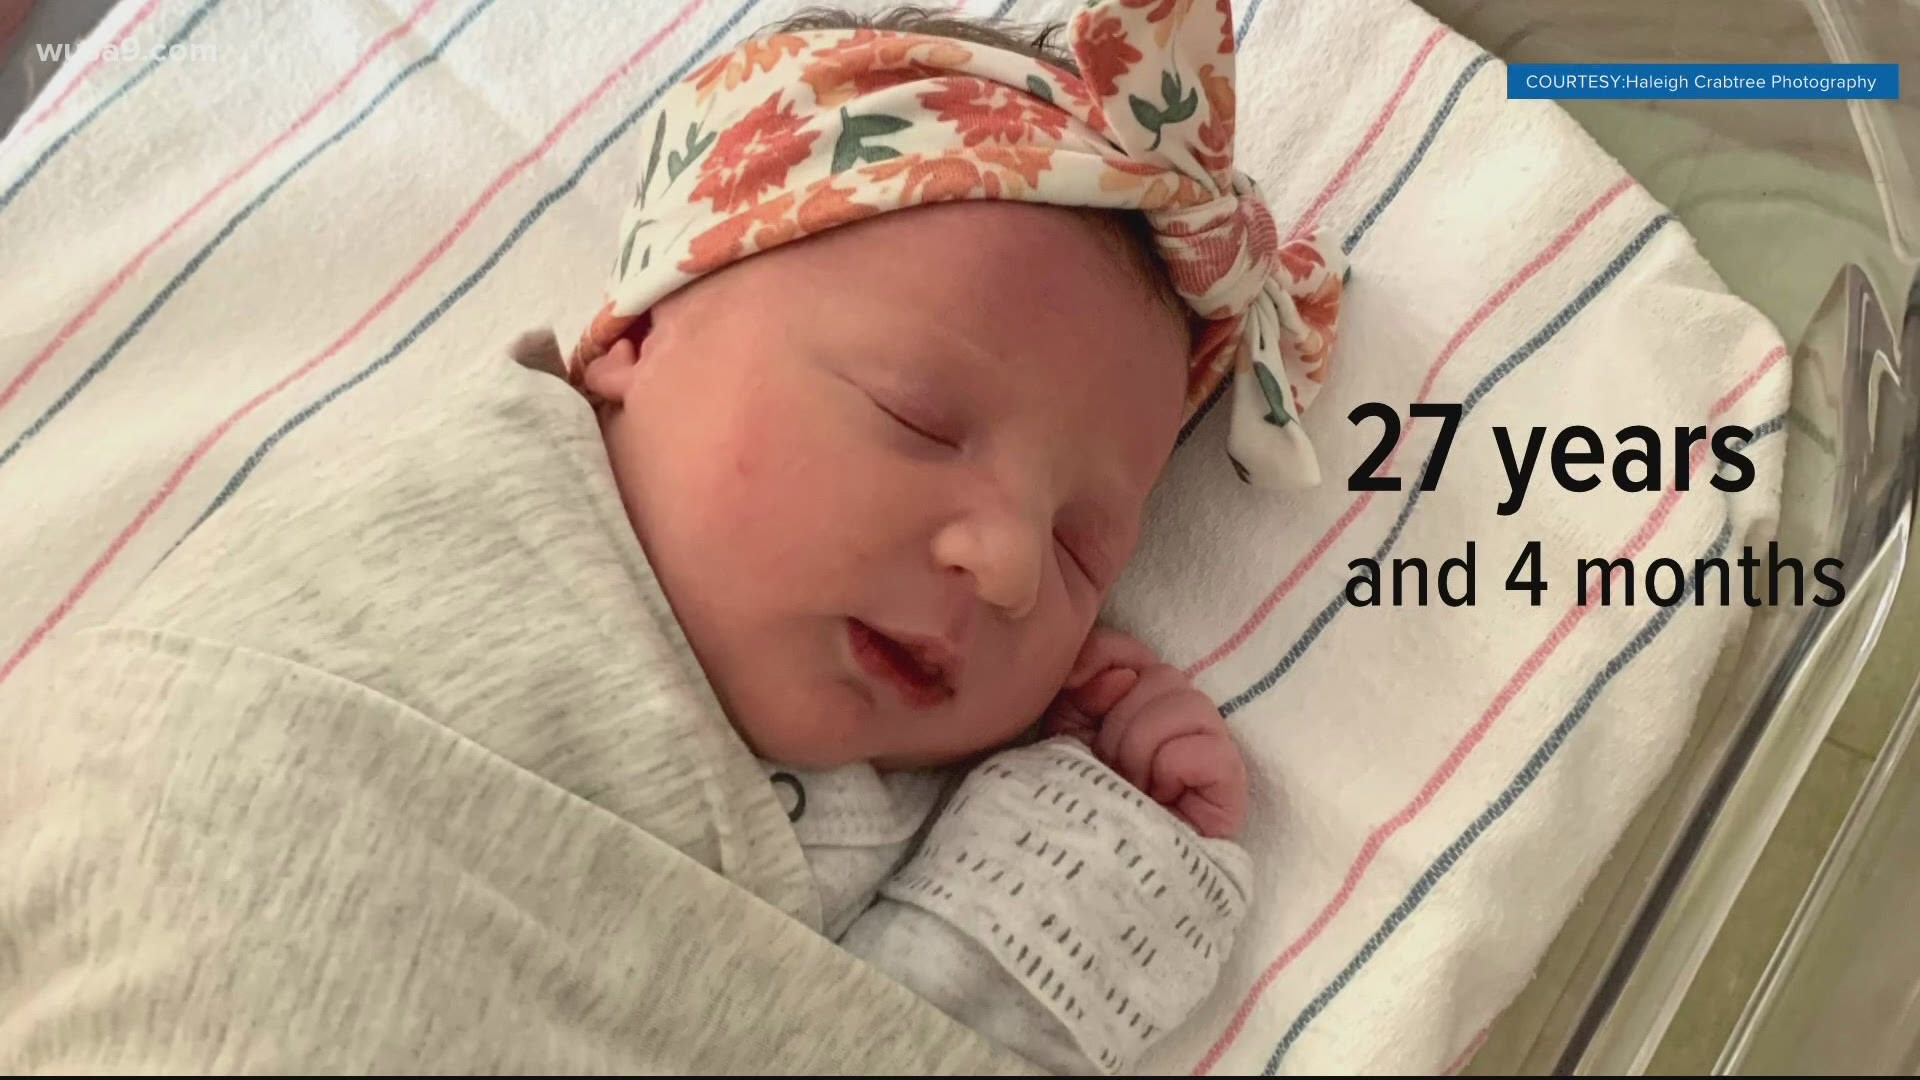 A Tennessee couple welcomes a baby girl who grew from an embryo that had been frozen for 27 years. It's believed to be the longest-frozen embryo to result in birth.